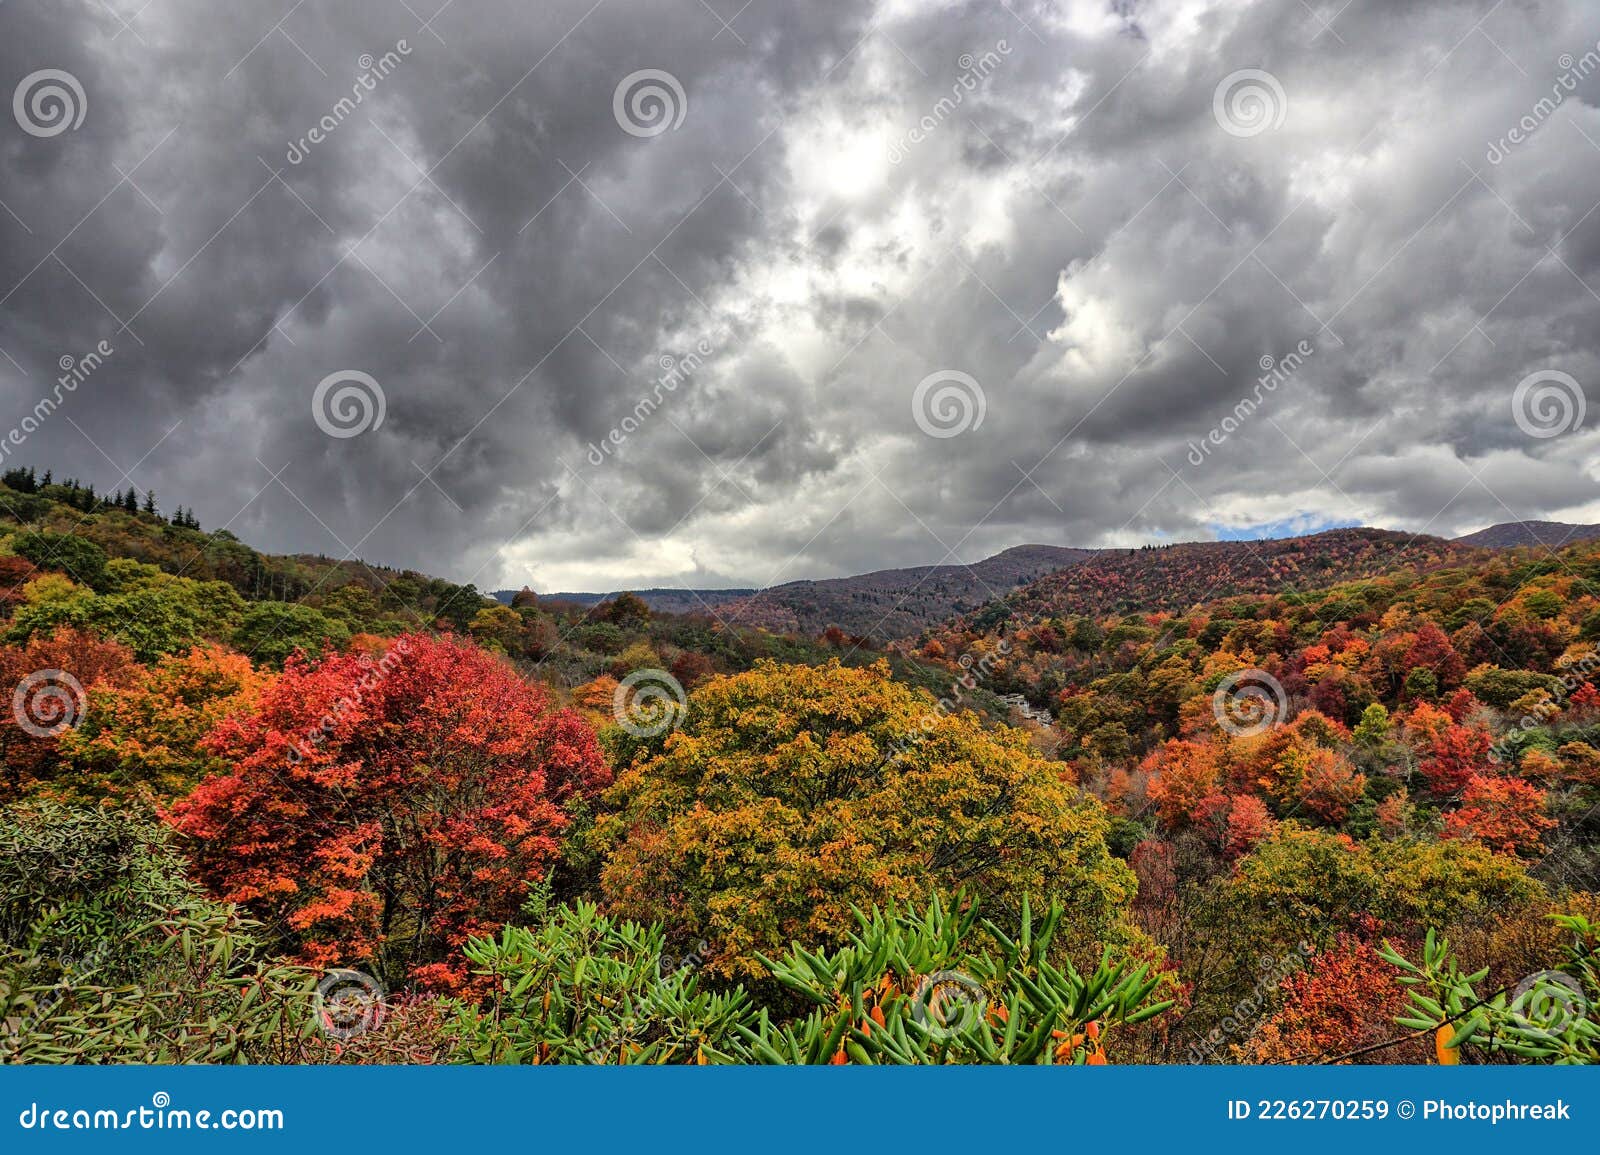 colors in mountians in fall with clouds